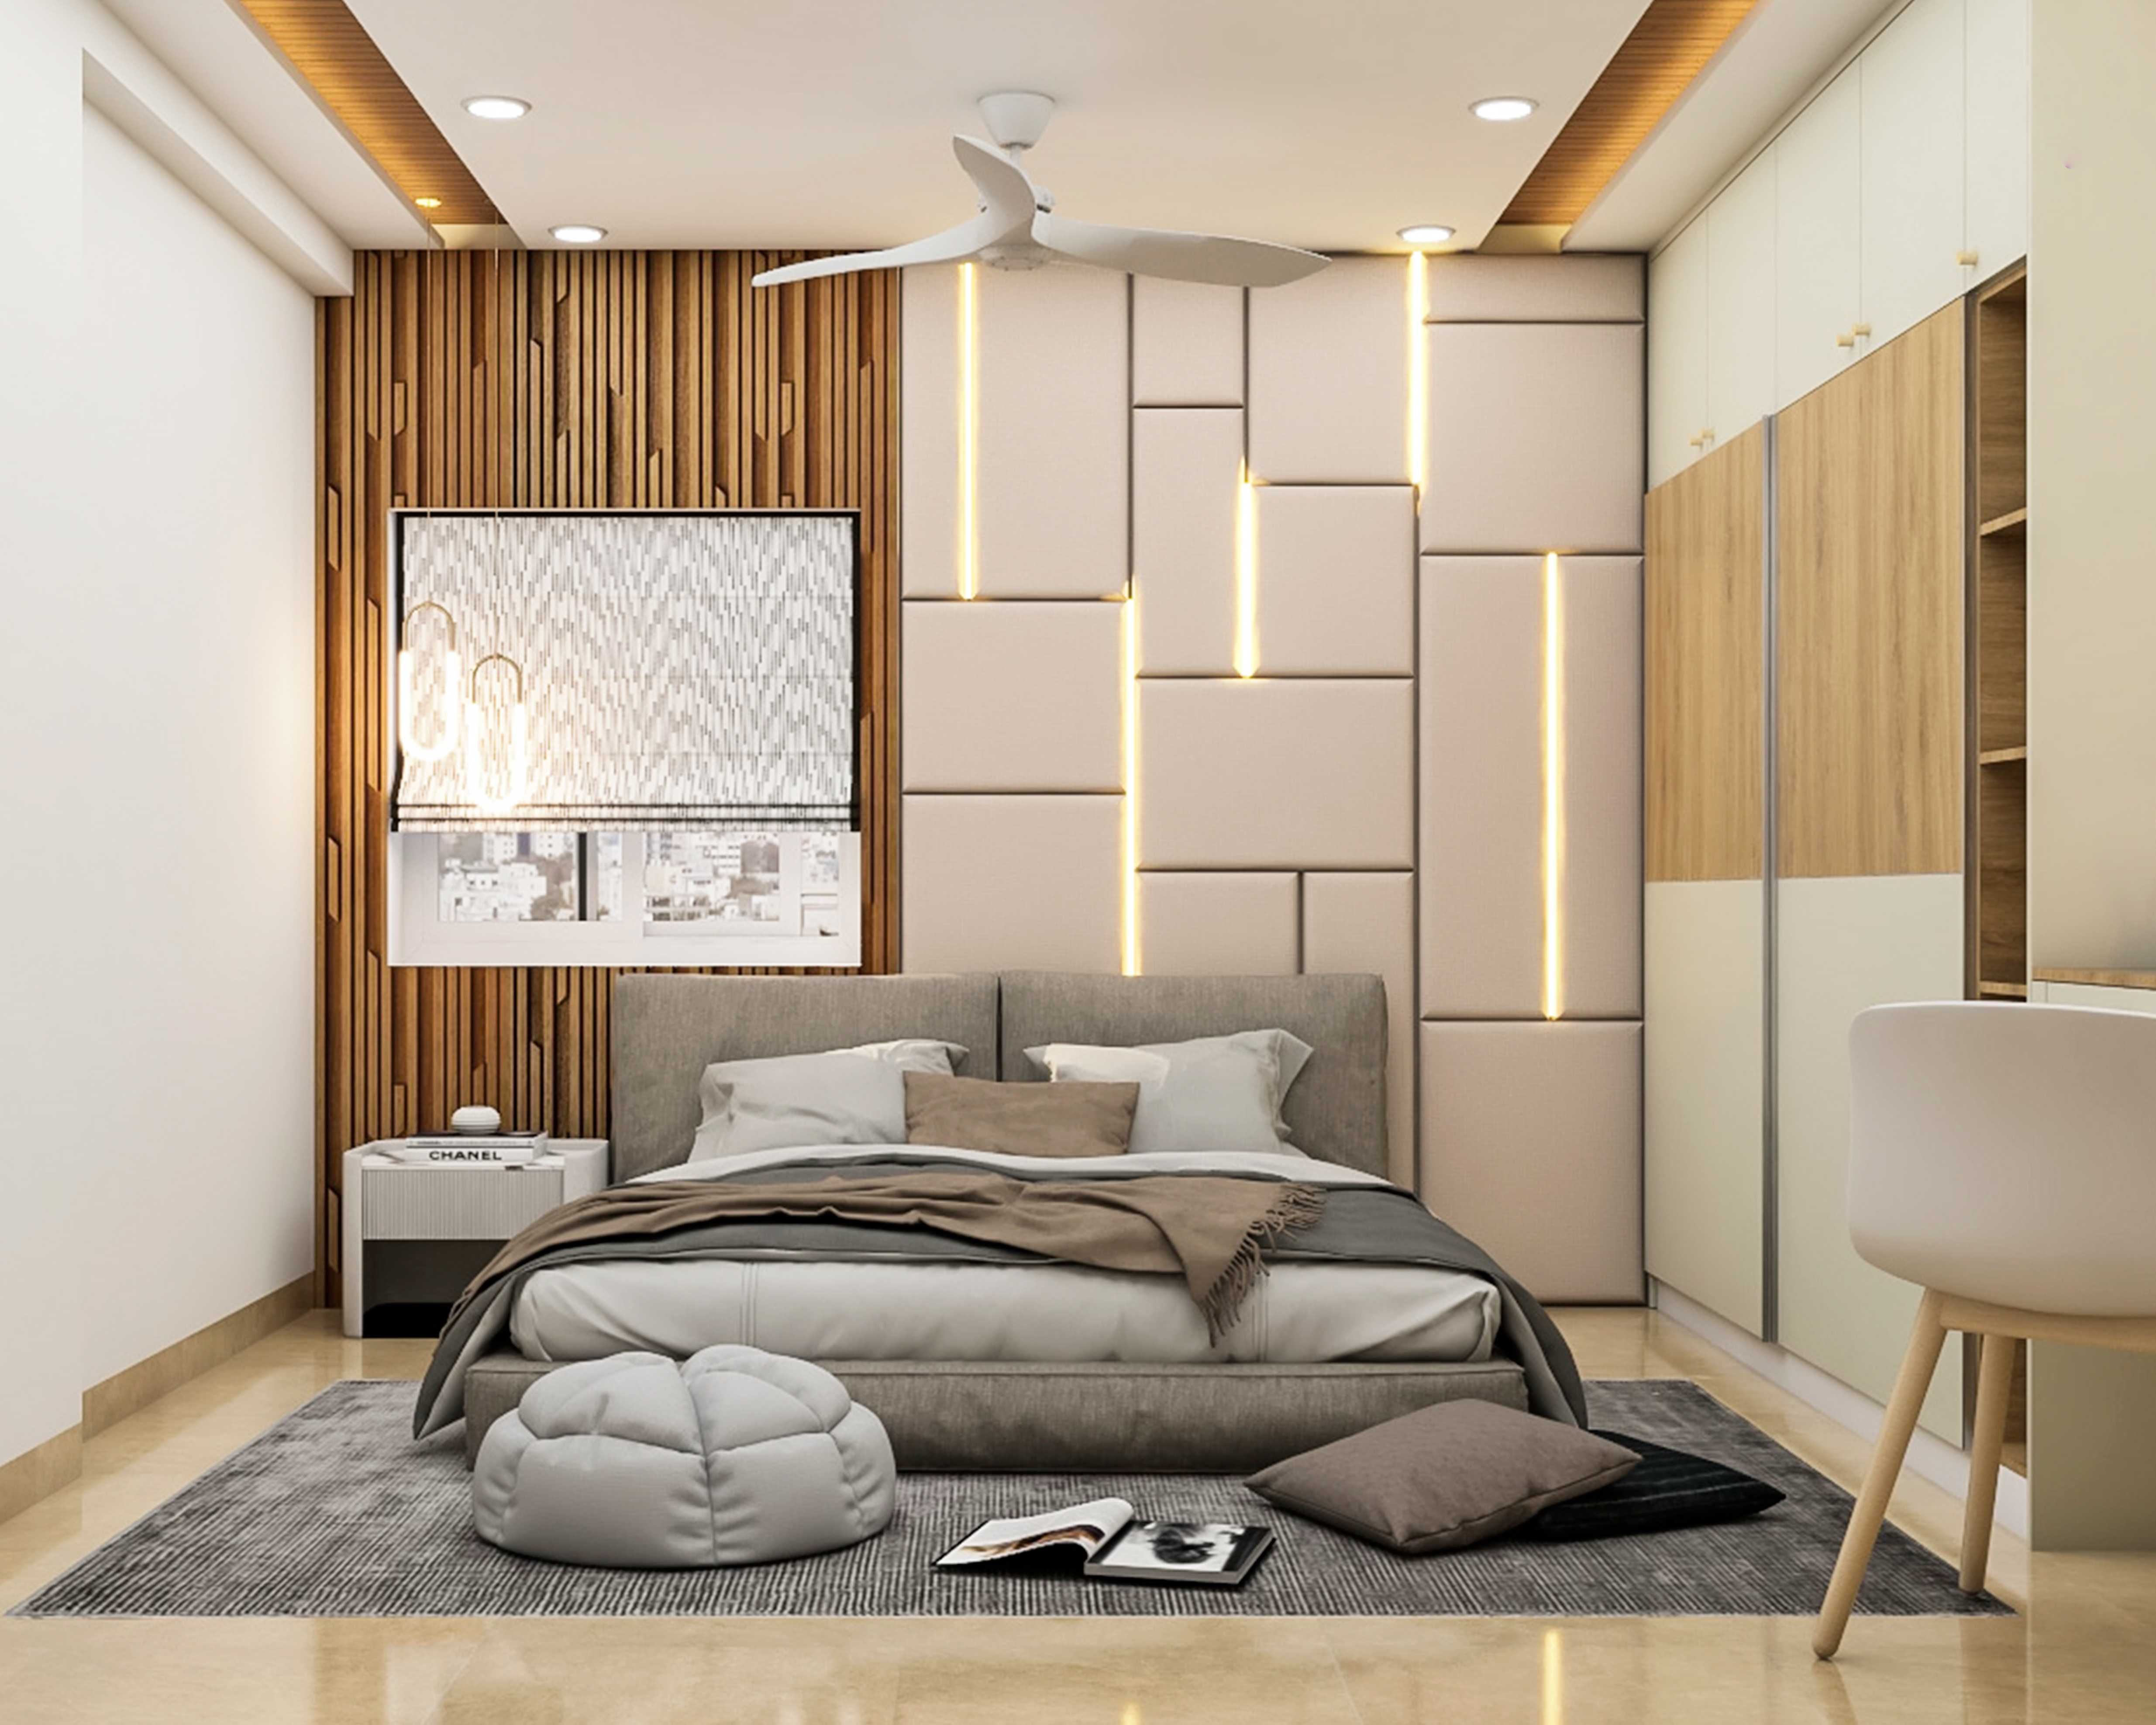 45+ Bedroom Design Ideas for Indian Homes in 2023